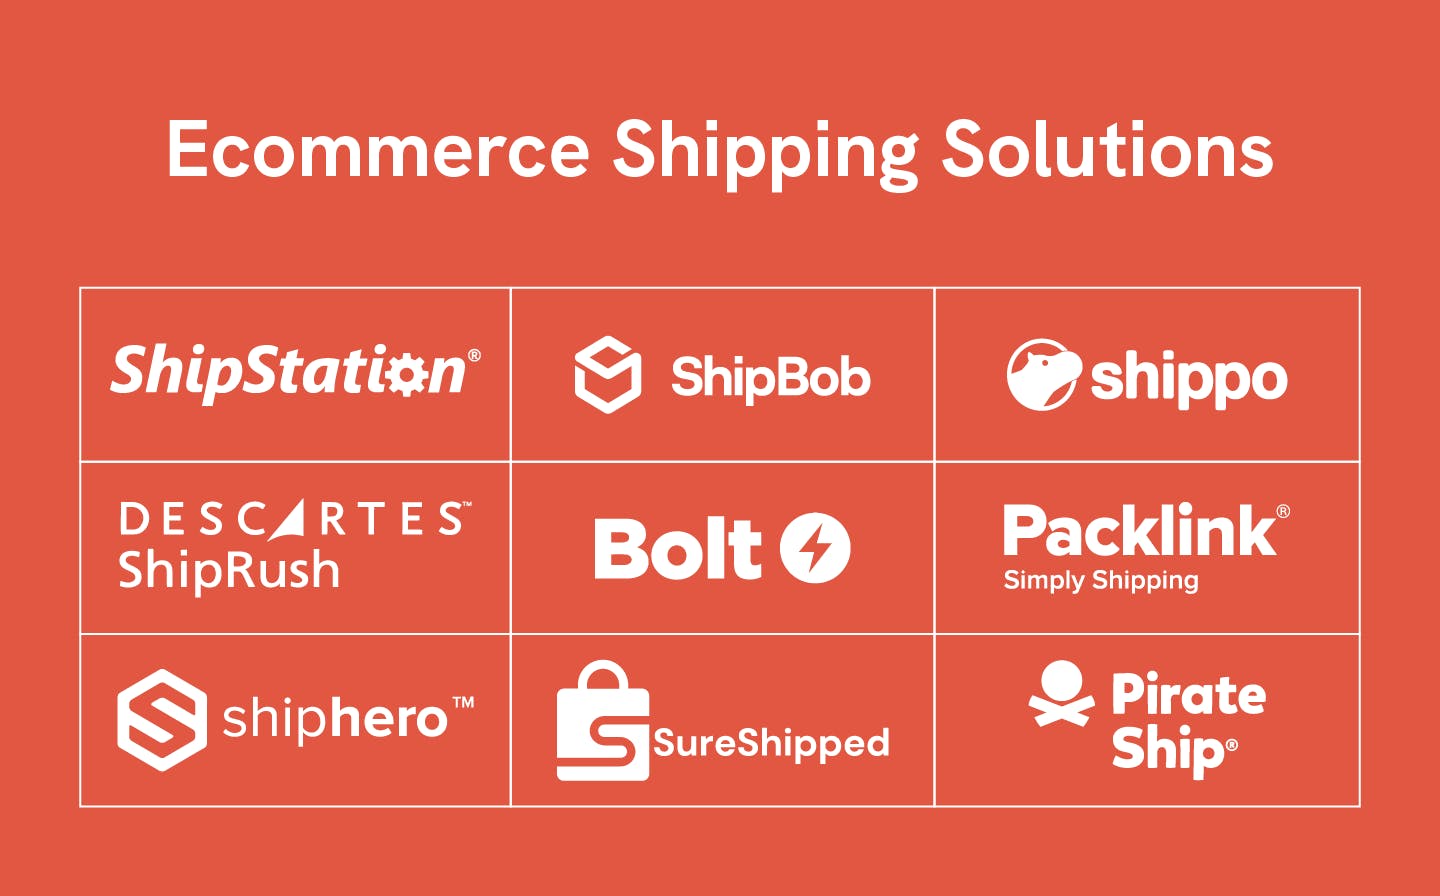 Chart featuring logos from ecommerce shipping solutions like ShipStation, ShipBob, Shippo, ShipRush, Bolt, Packlink, Shiphero, SureShipped, and Pirate Ship.